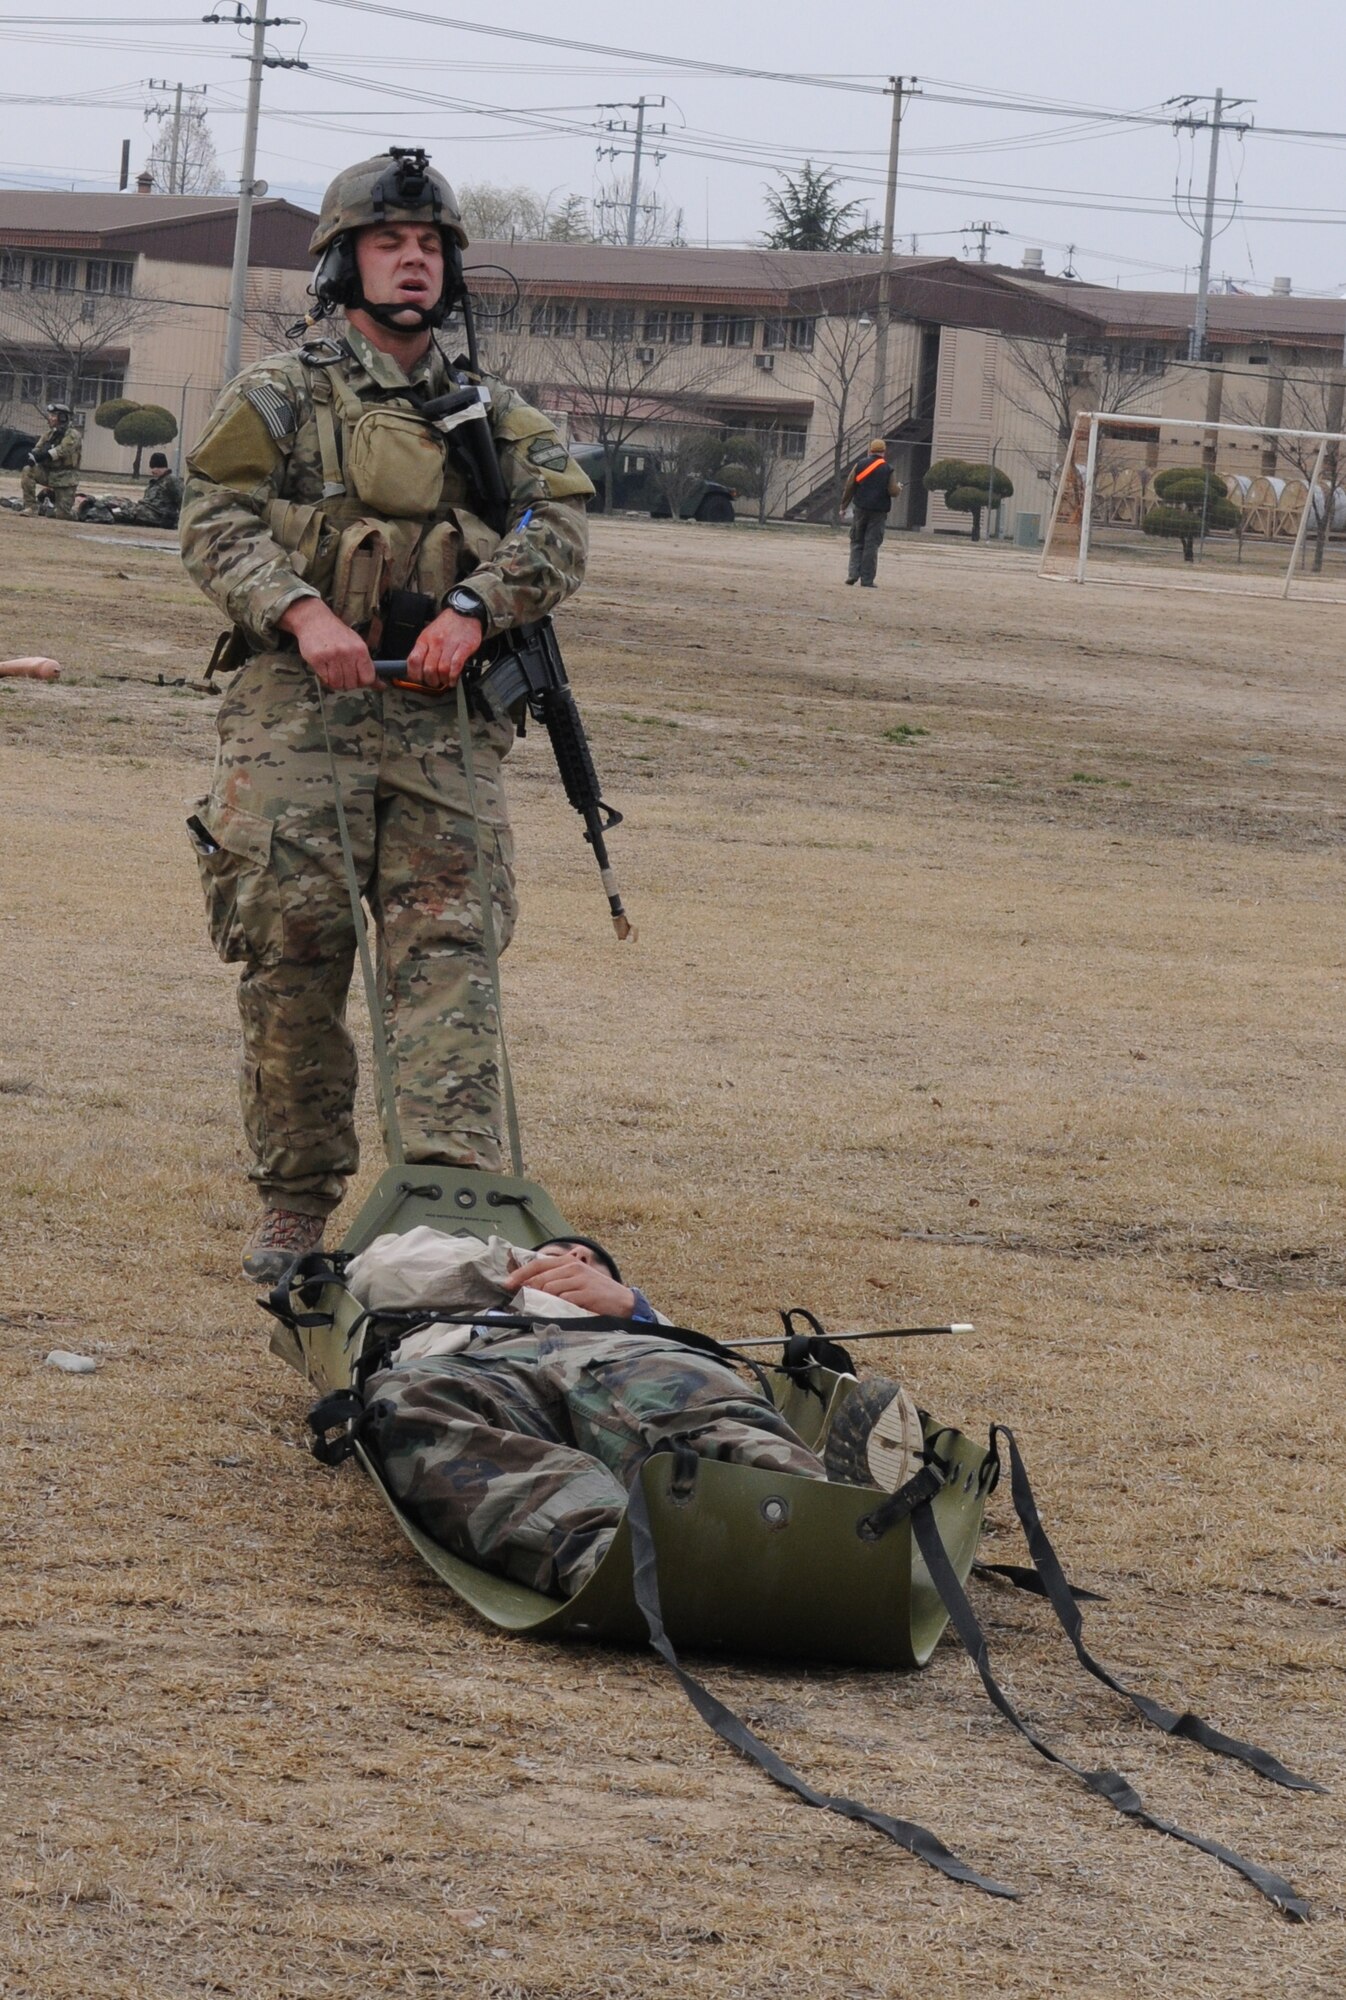 DAEGU AIR BASE, Republic of Korea -- Tech. Sgt. Michael Charvat, a combat controller from the 320th Special Tactics Squadron, drags a simulated wounded soldier to the casualty collection point using a sked stretcher during a mass casualty exercise here March 27. The scenario is part of the 353rd Special Operations Group’s annual operational readiness exercise. (U.S. Air Force photo by Tech. Sgt. Aaron Cram)